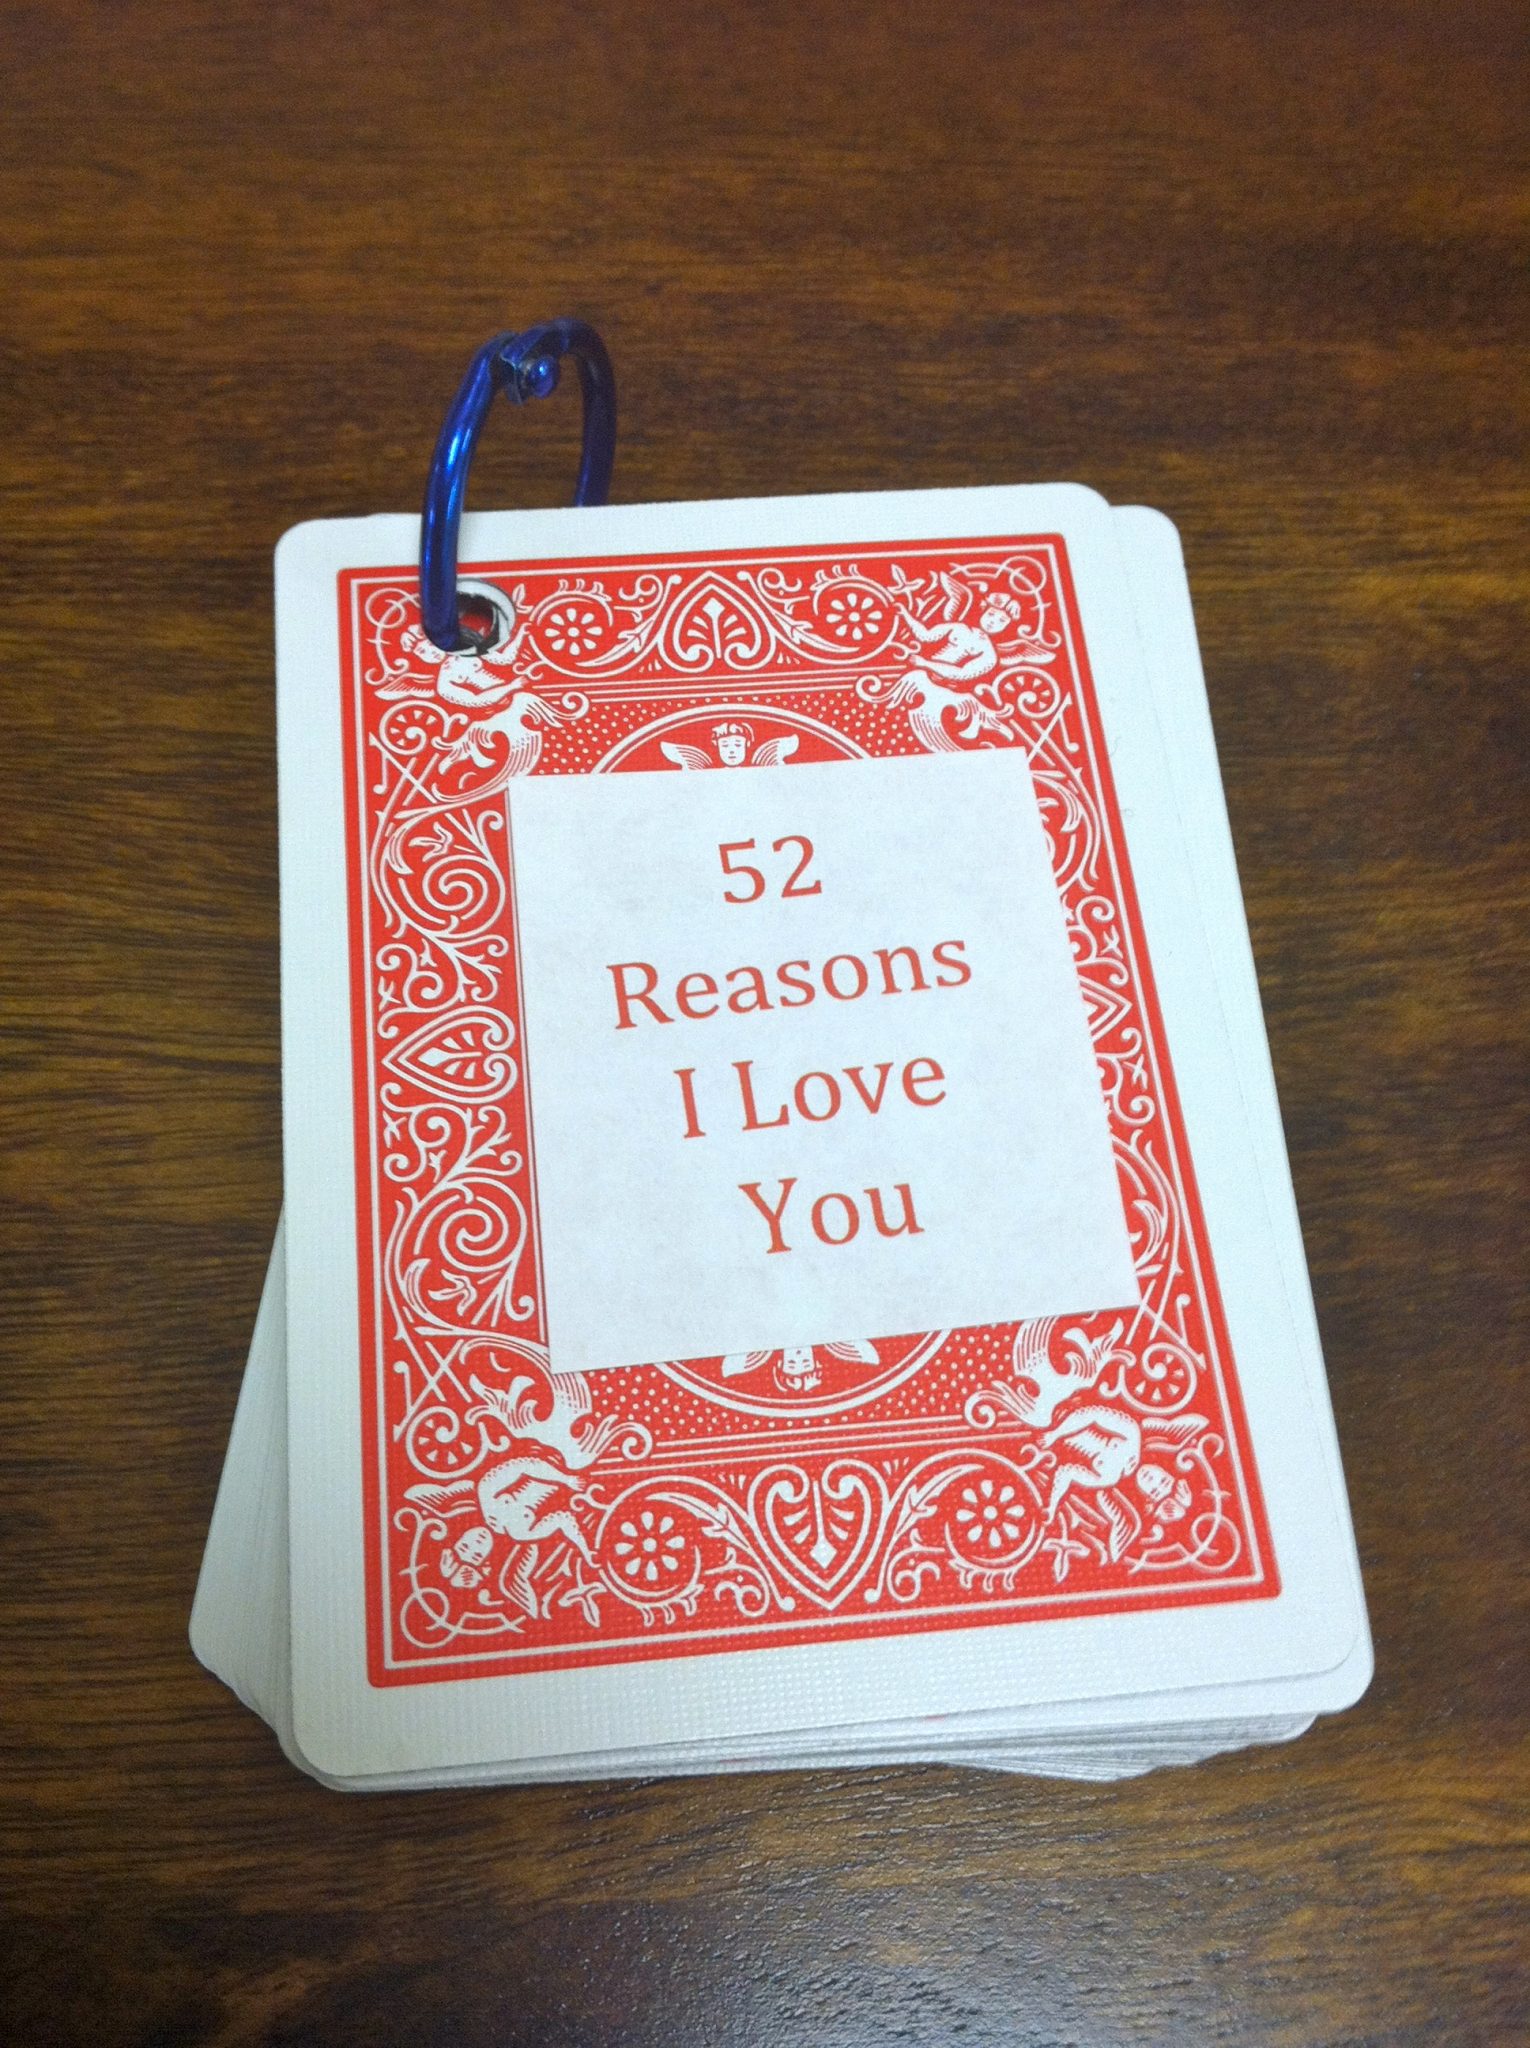 Easy DIY Project to let your significant other know you care // 52 Reasons I Love You Cards // DIY Valentines Day Gift